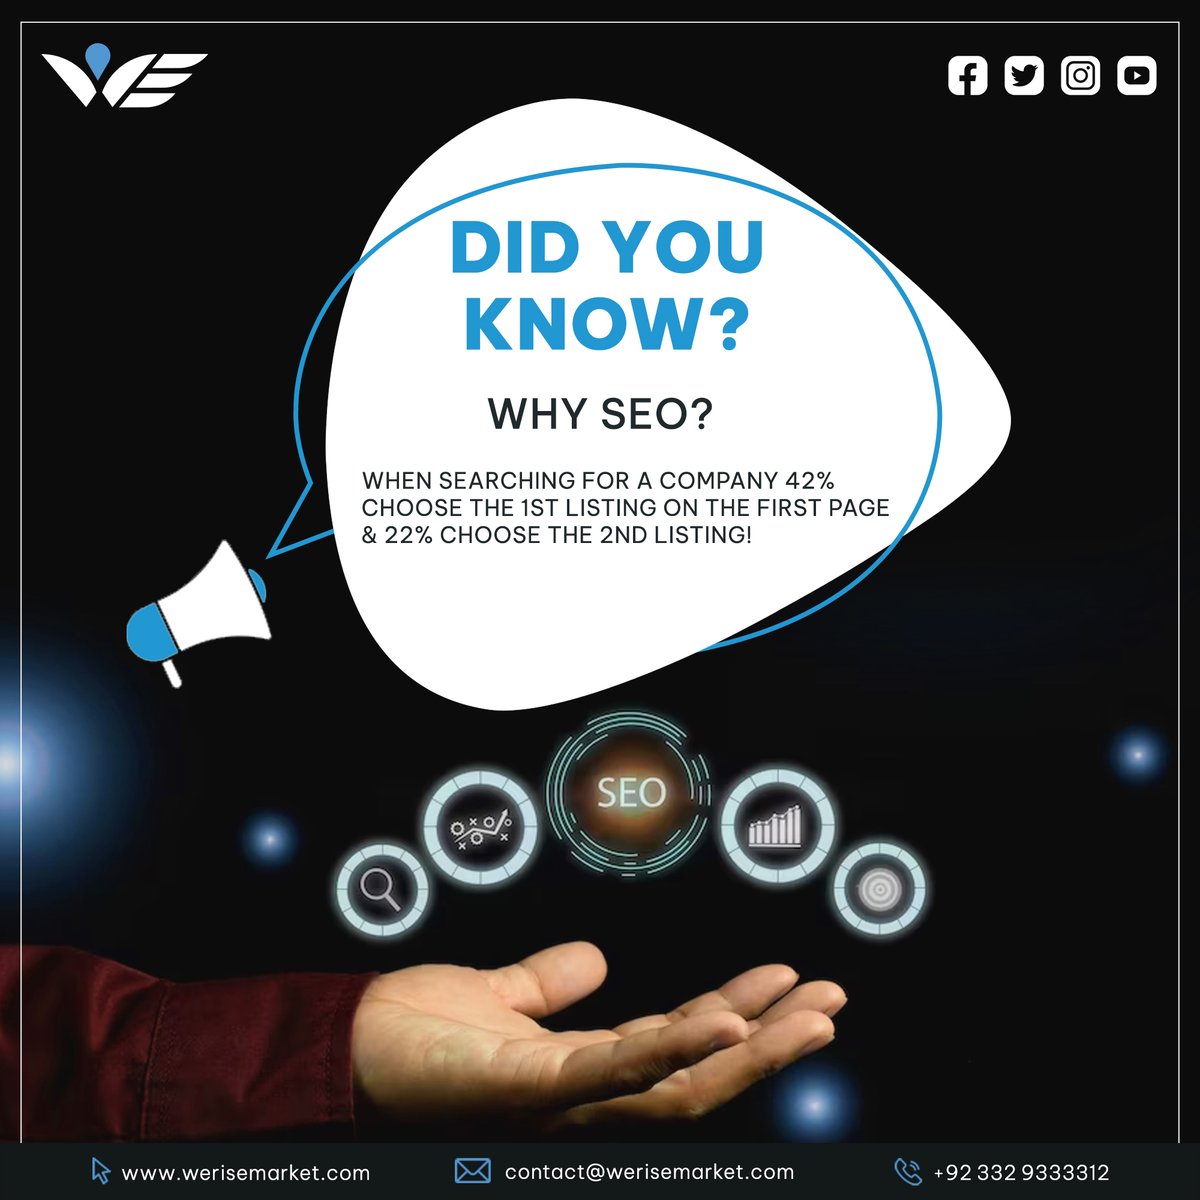 Be the first to impress! With 42% favoring the 1st listing, SEO gets your company noticed. Reach us today! 📷 +92 332 933 3312 📷 werisemarket.com #WeRiseMarket #DigitalMarketingStrategy #independentwerise